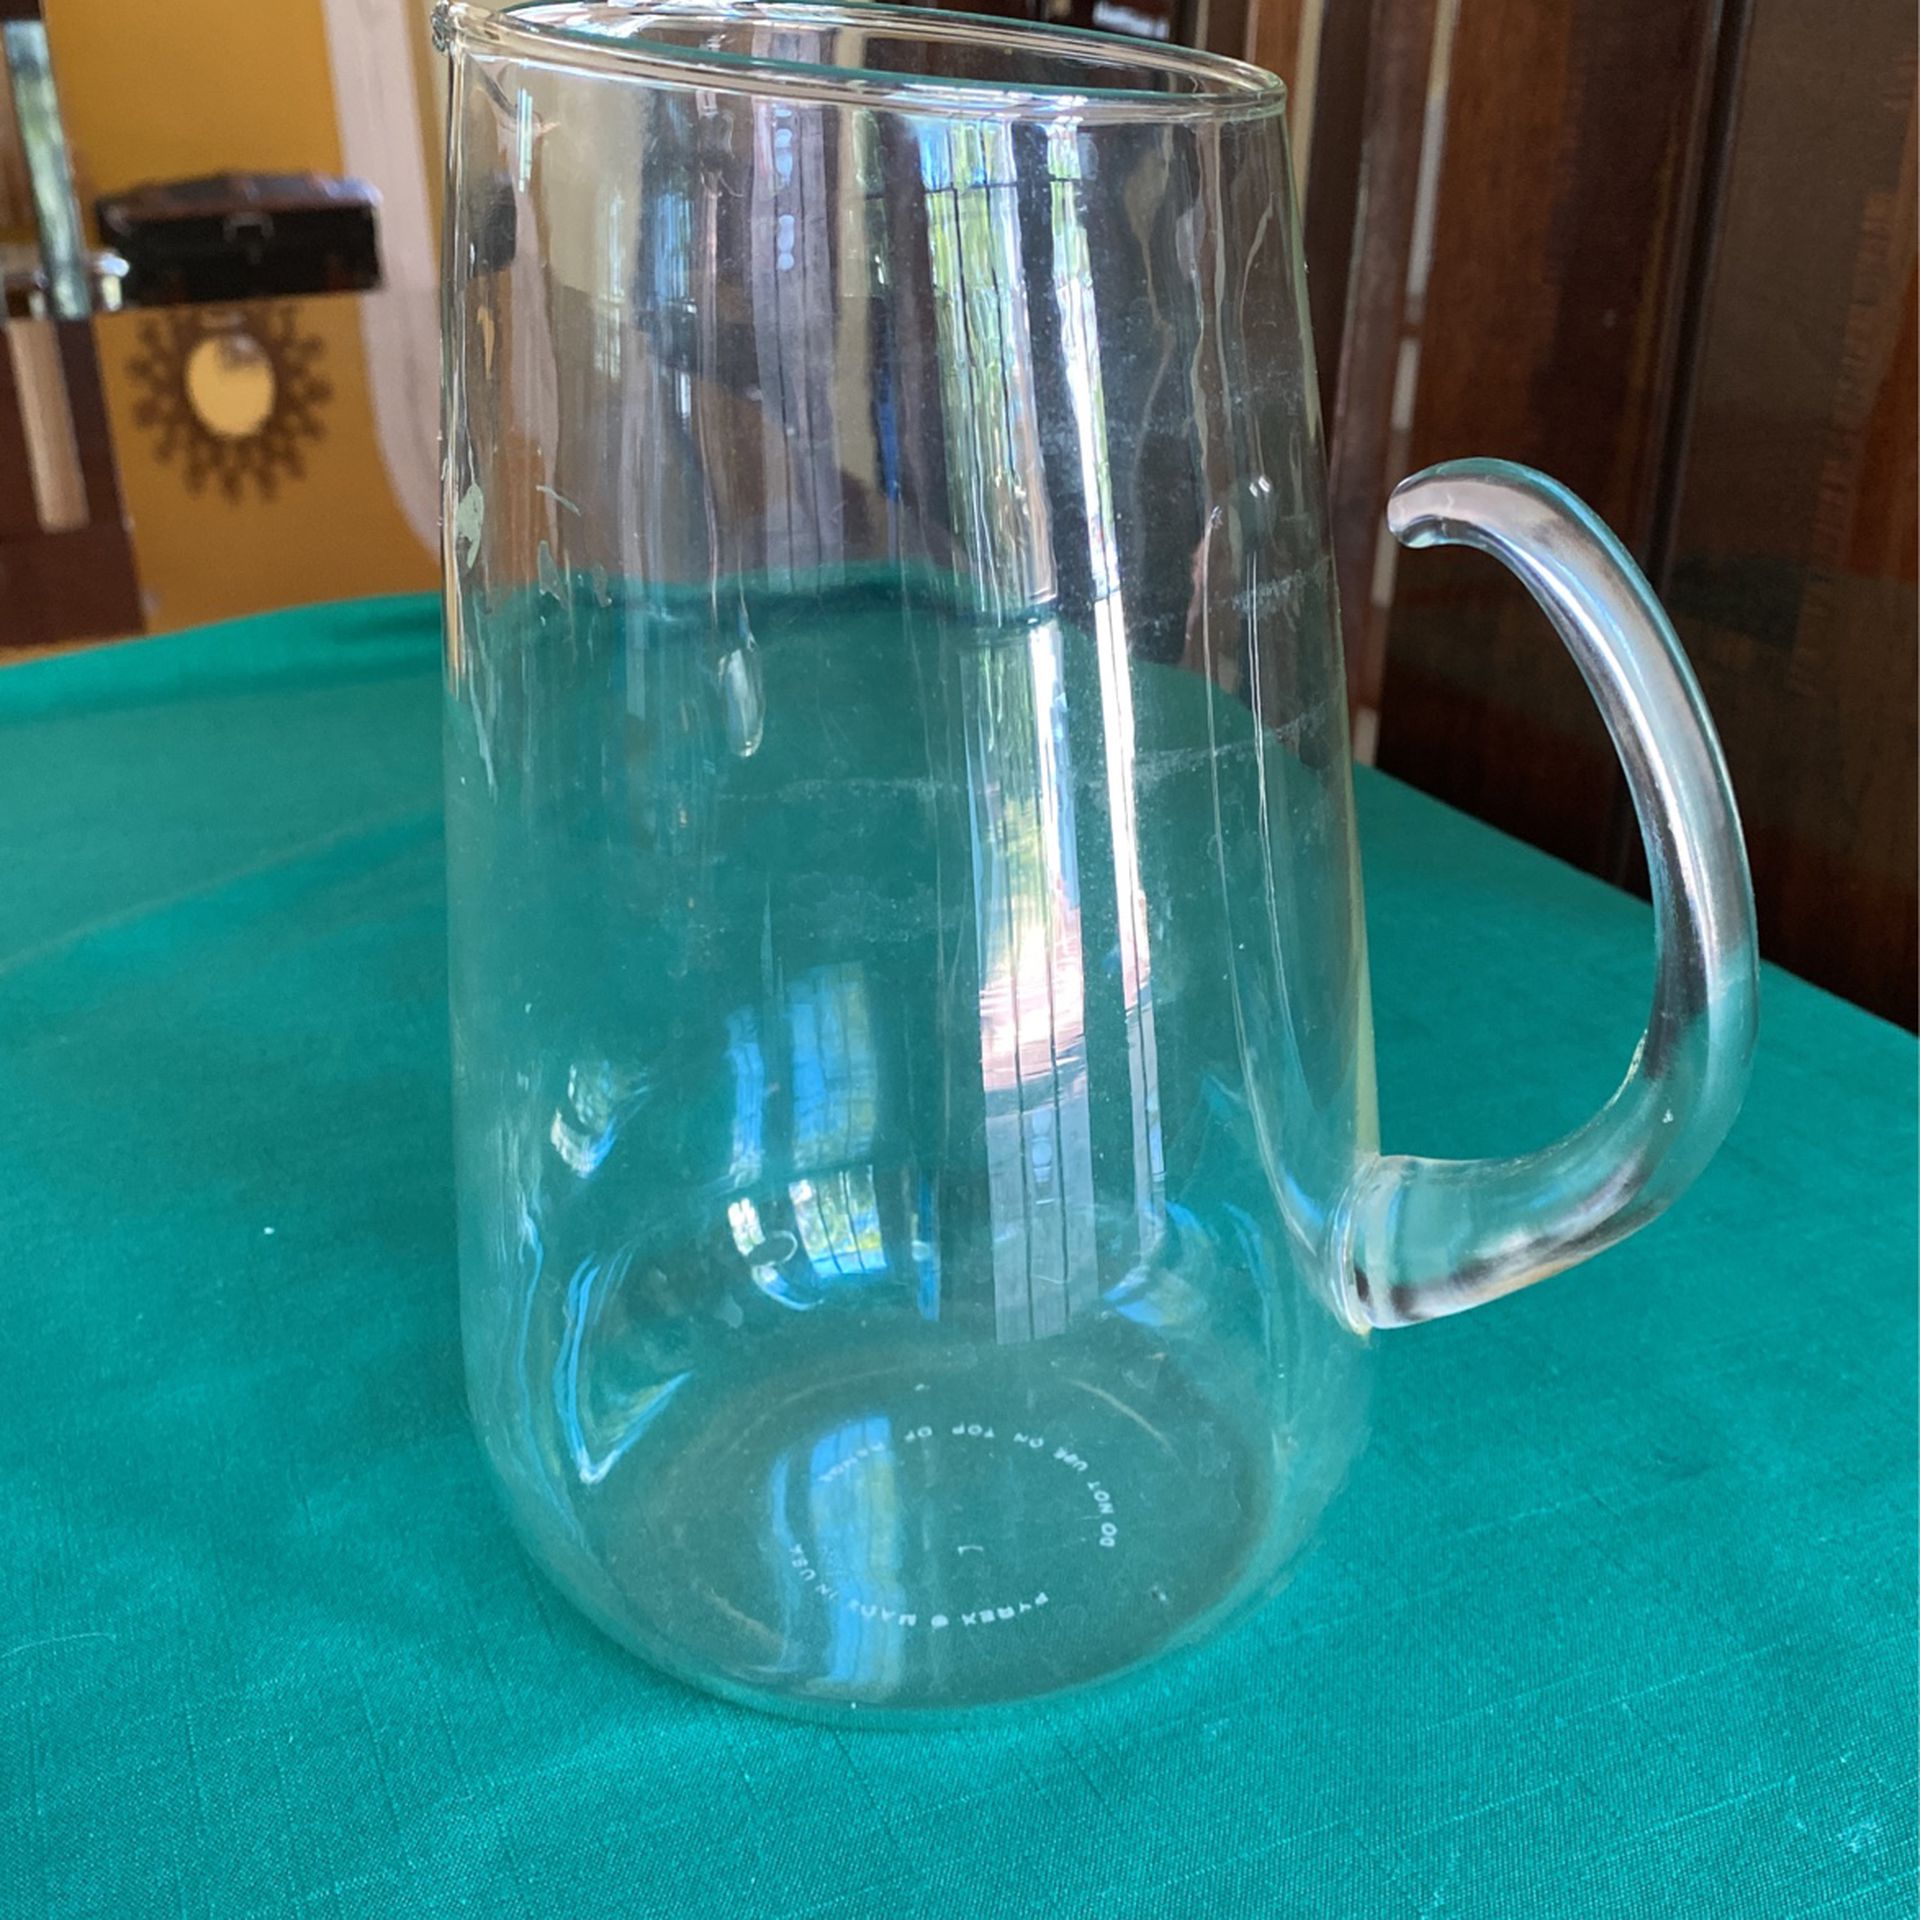 Pyrex Made in USA 10 inch tall clear glass vintage collectible unique handle water pitcher